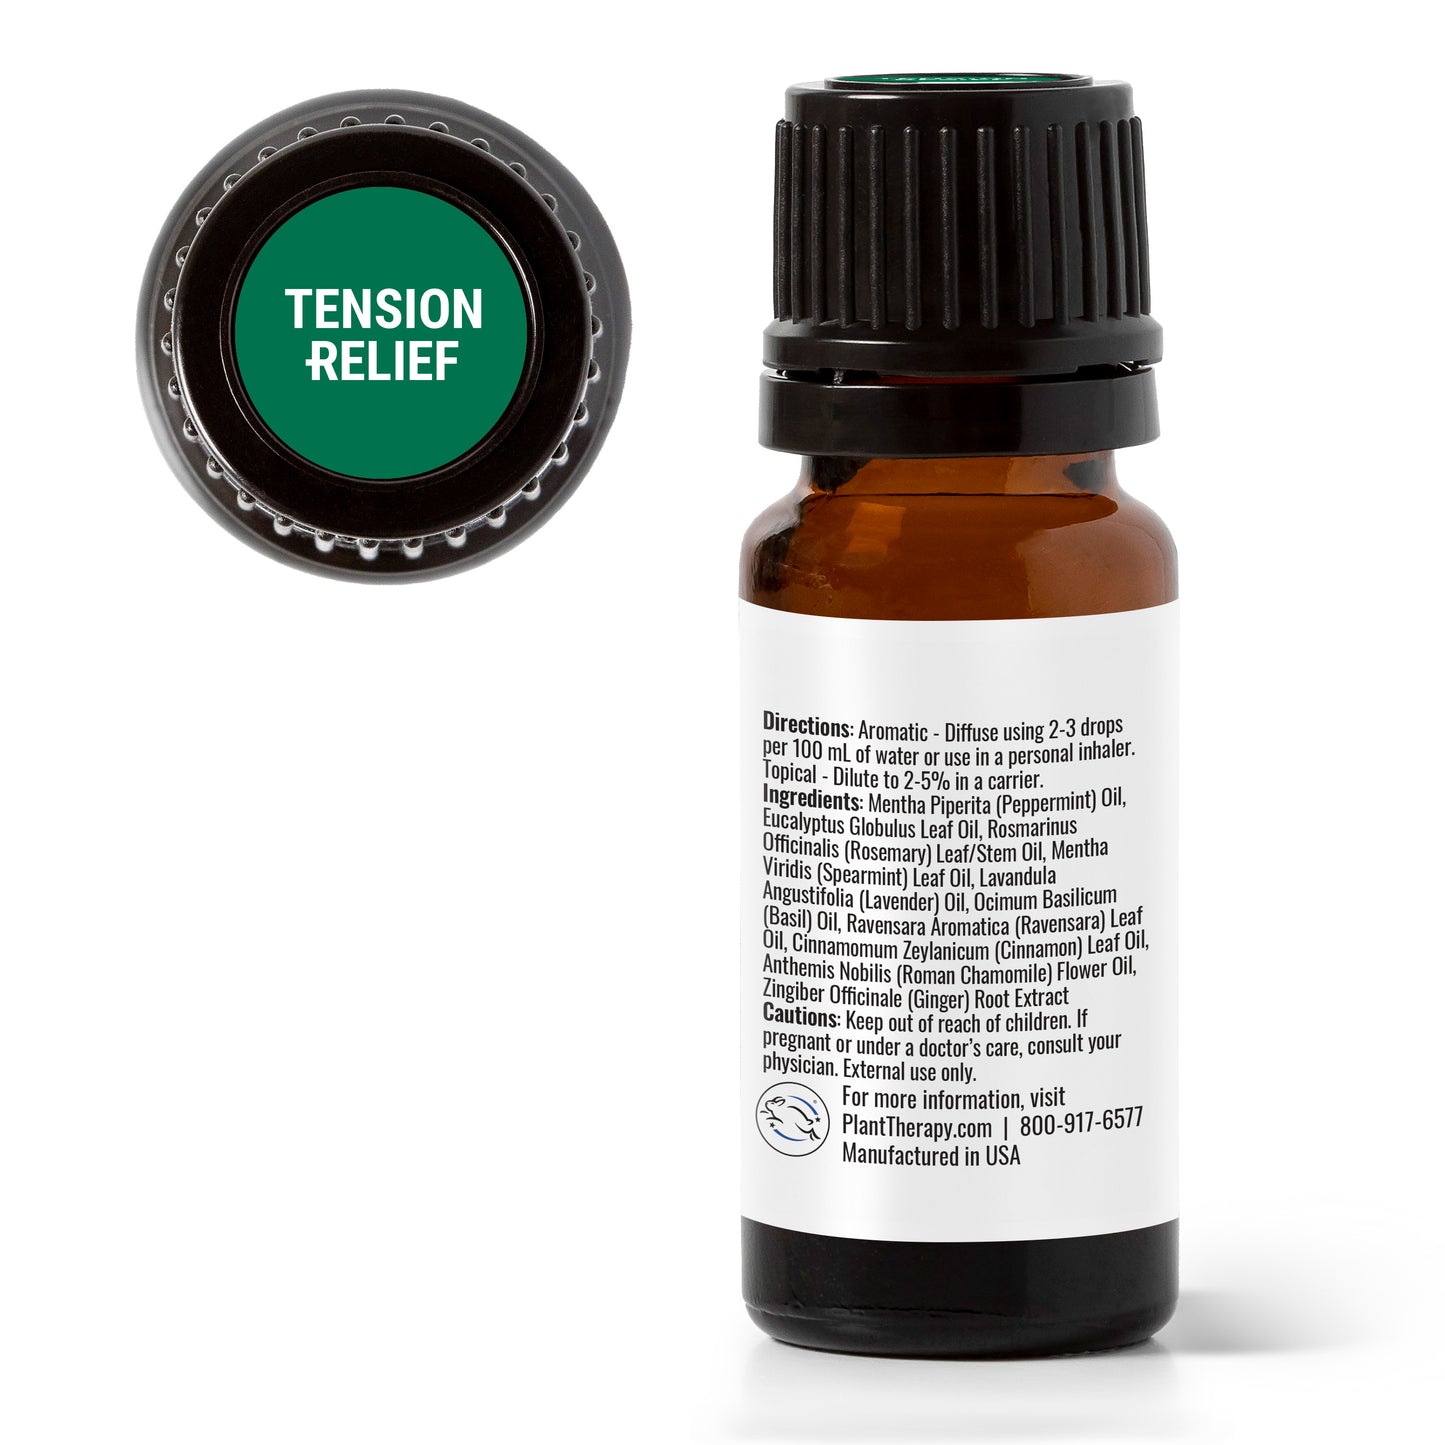 Tension Relief Essential Oil Blend back label